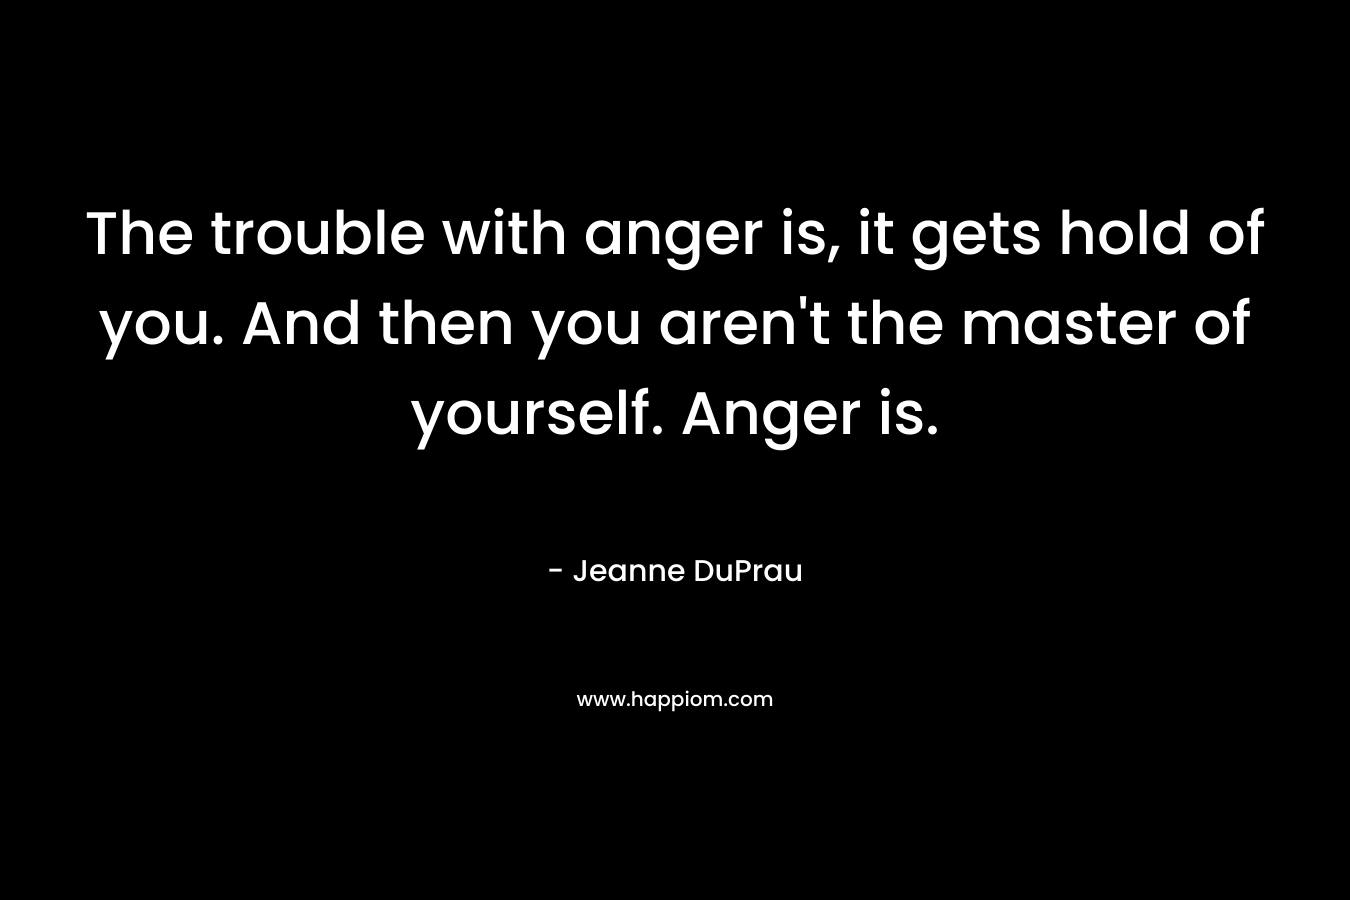 The trouble with anger is, it gets hold of you. And then you aren't the master of yourself. Anger is.